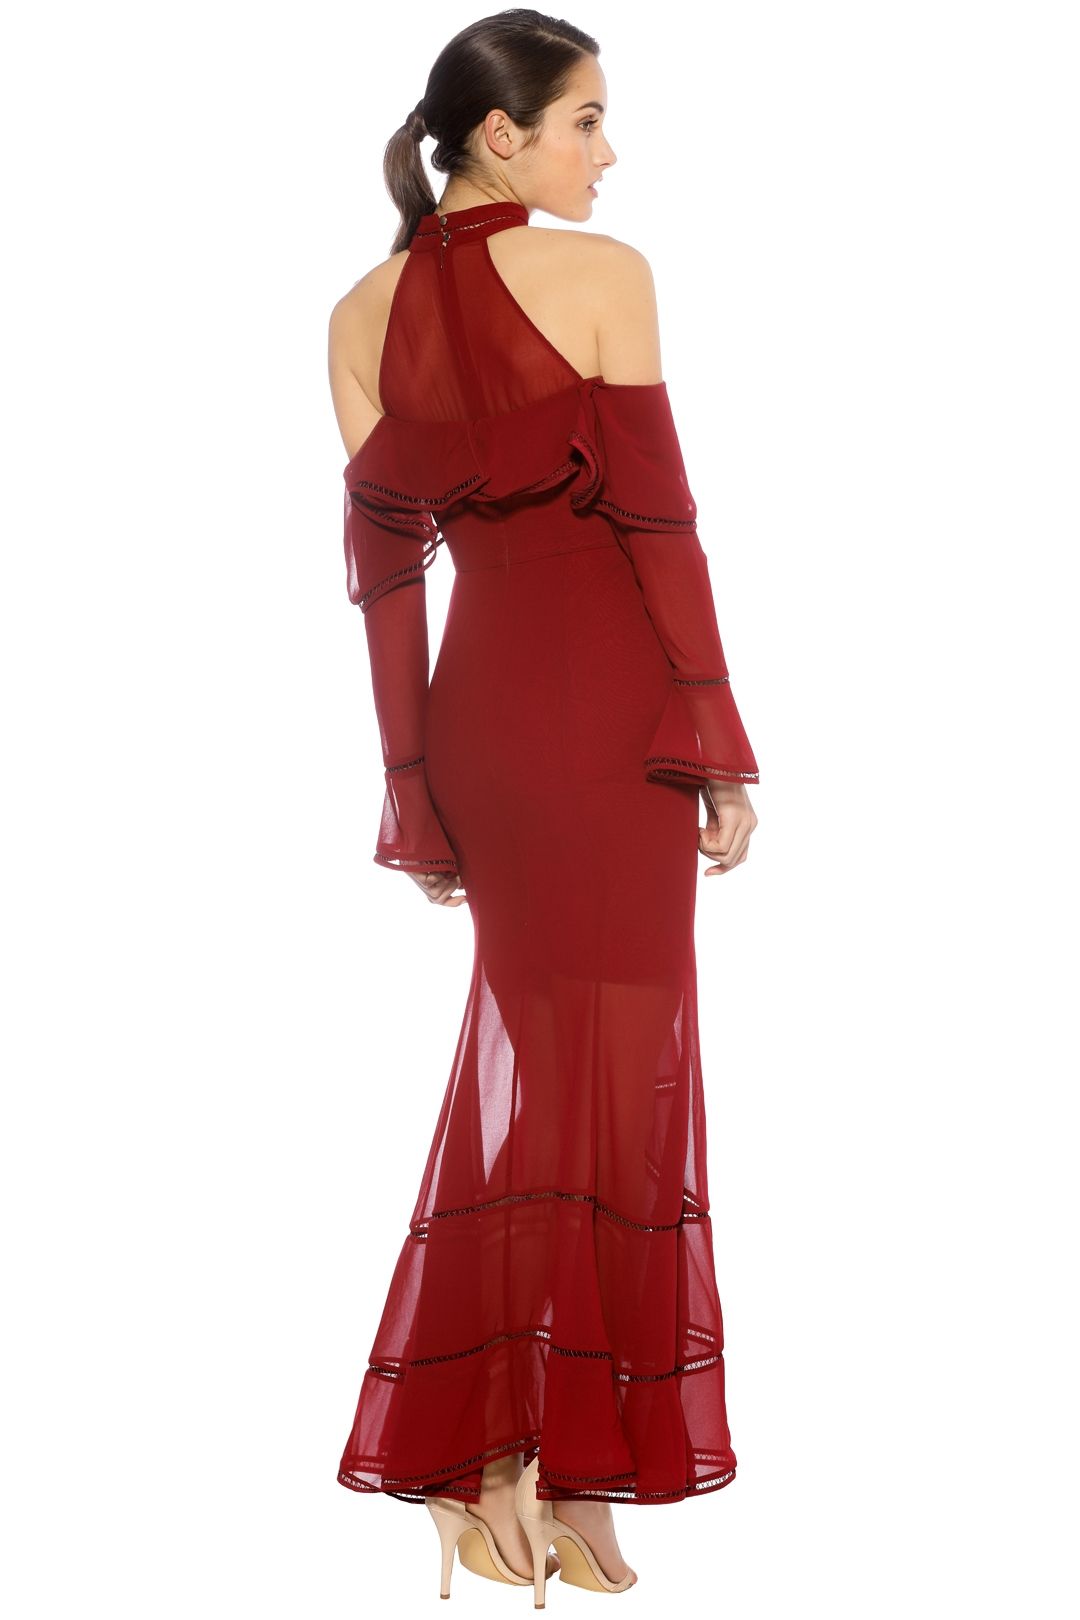 Keepsake the Label - Lovers Holiday Gown - Plum - Back